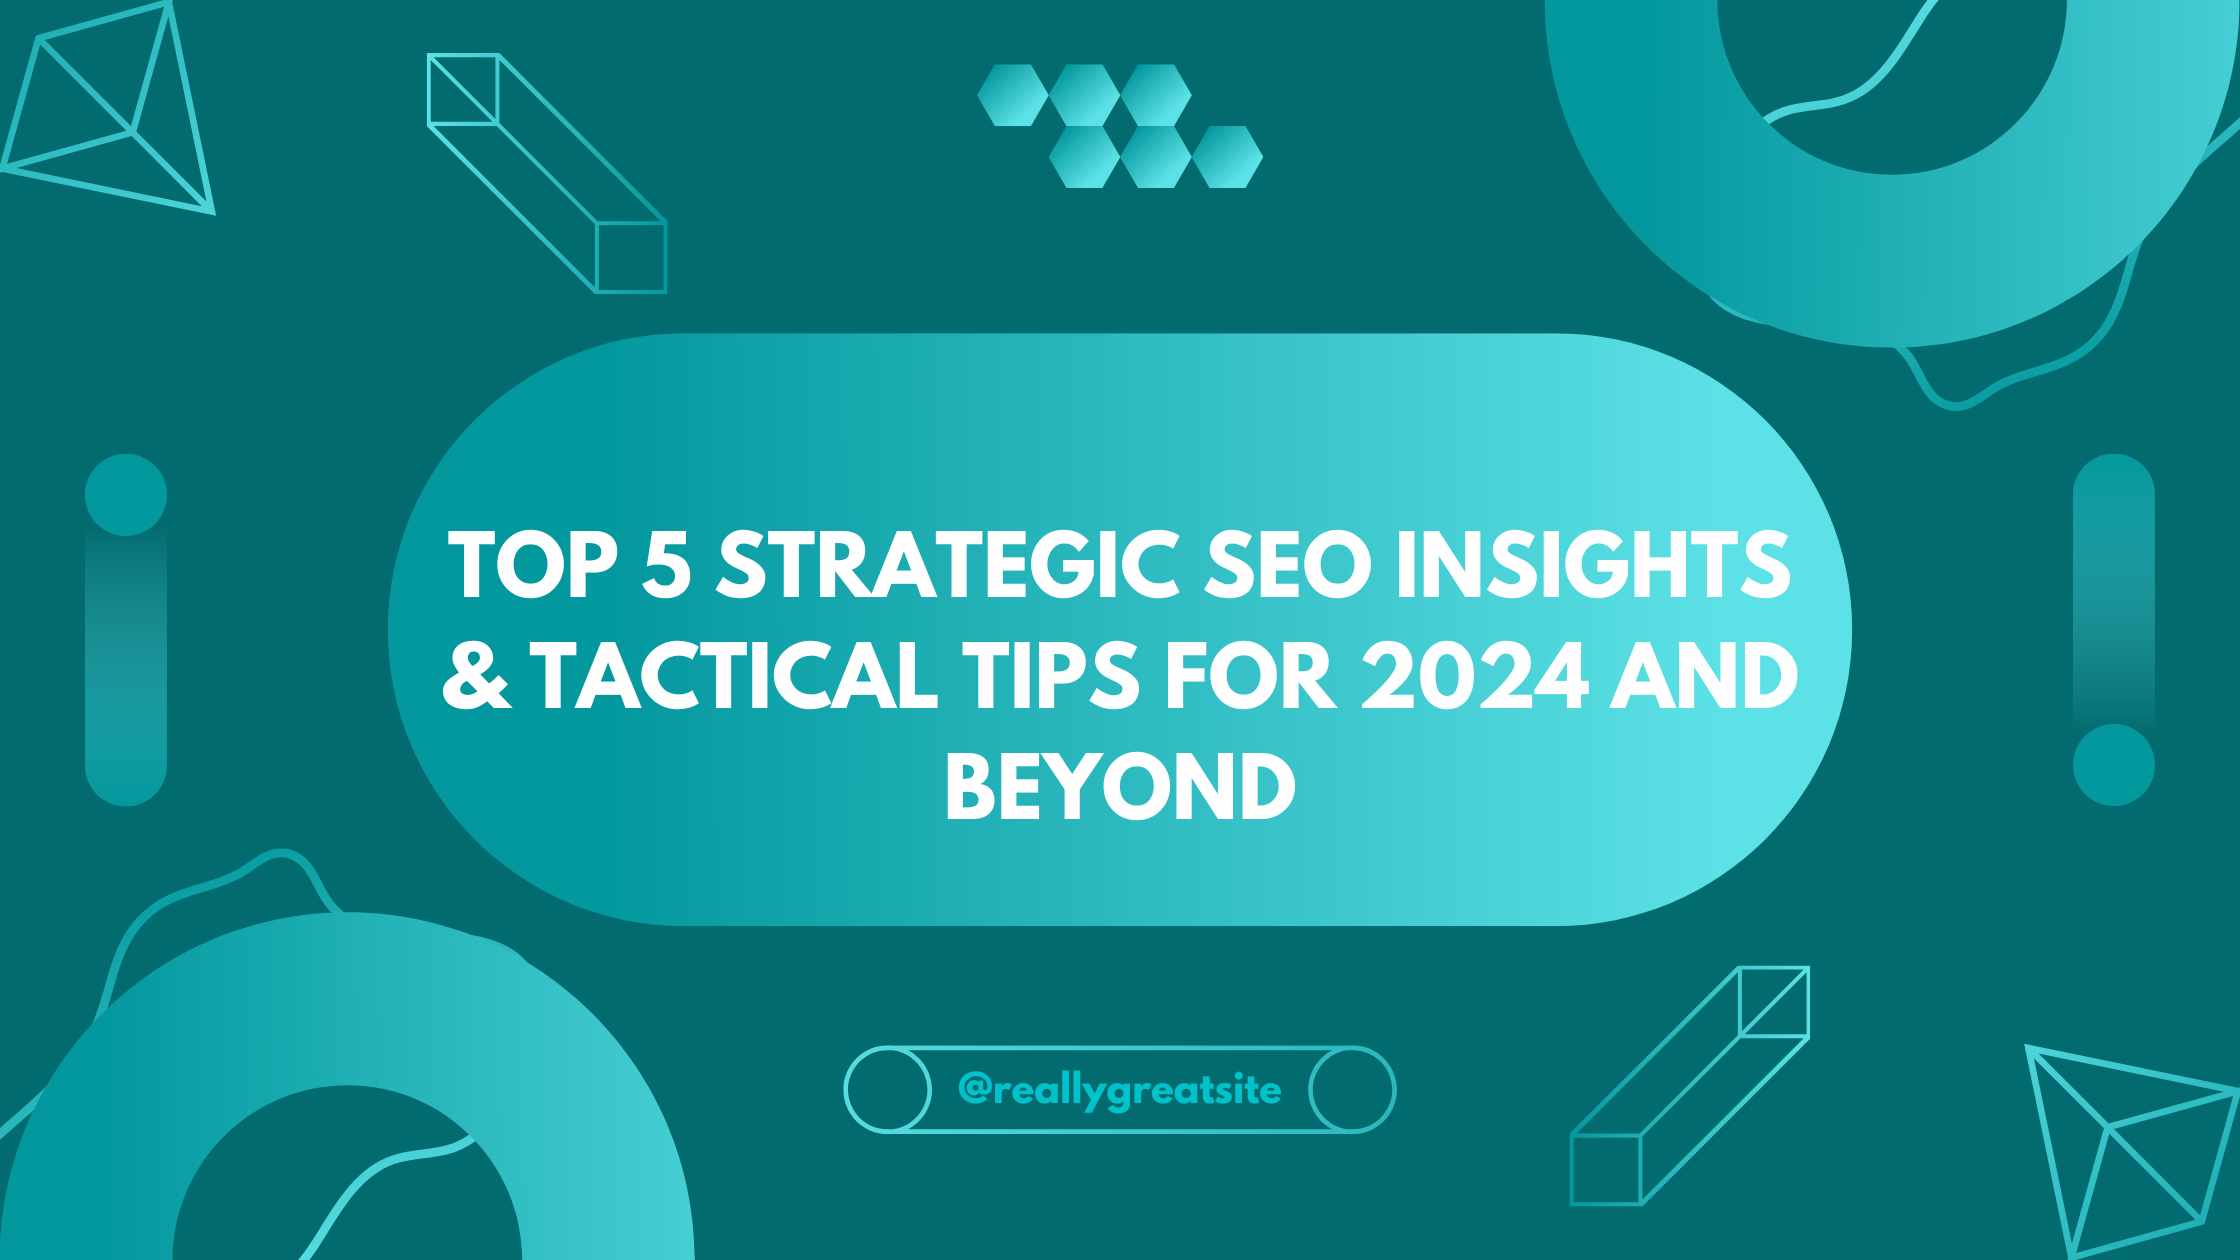 Top 5 Strategic SEO Insights & Tactical Tips For 2024 And Beyond